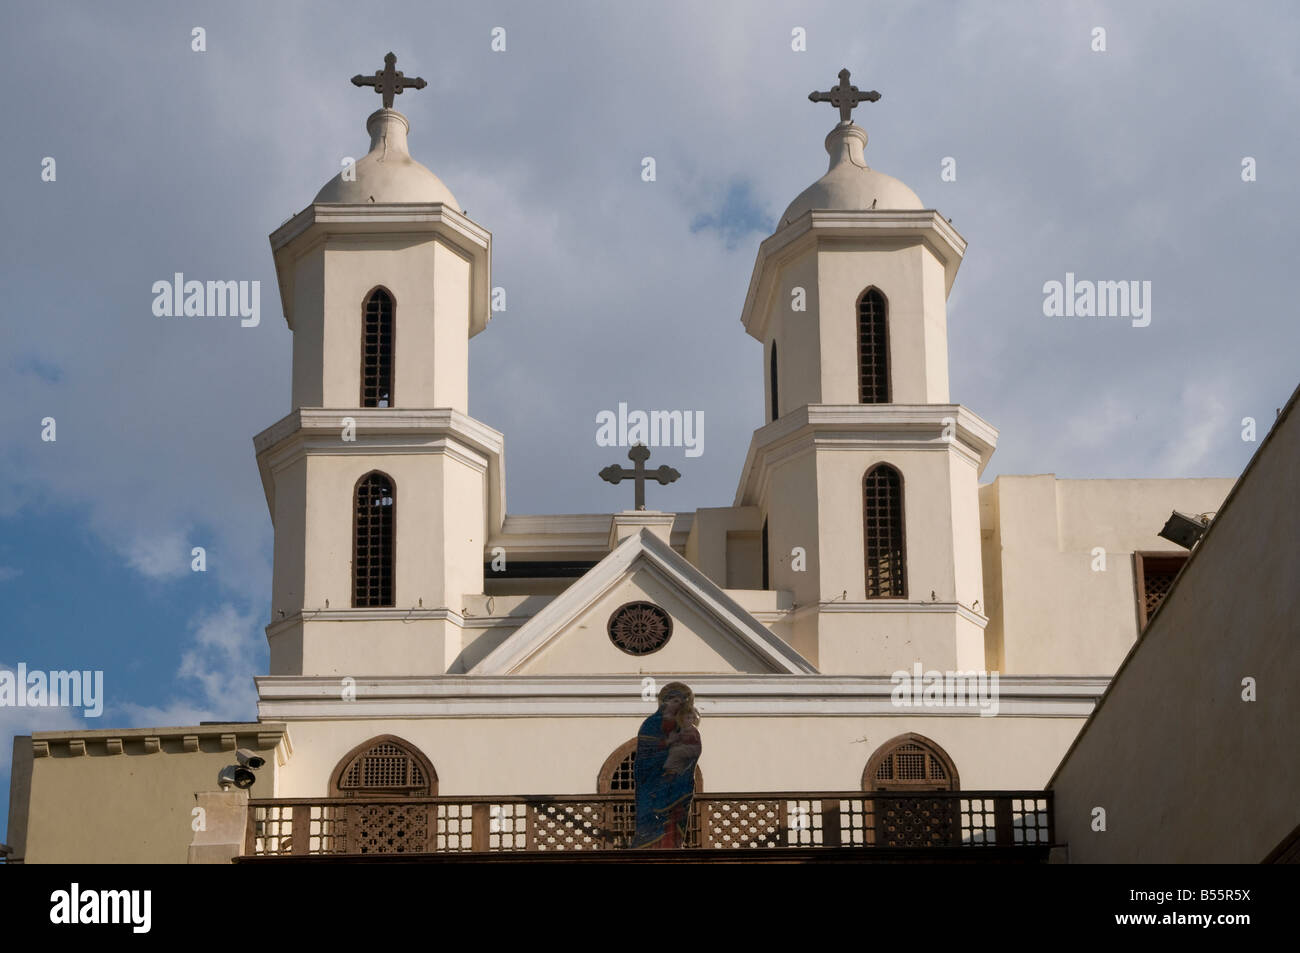 The twin bell towers of the Saint Virgin Mary's Coptic Orthodox also known as the Hanging Church in the Coptic district Cairo Egypt Stock Photo